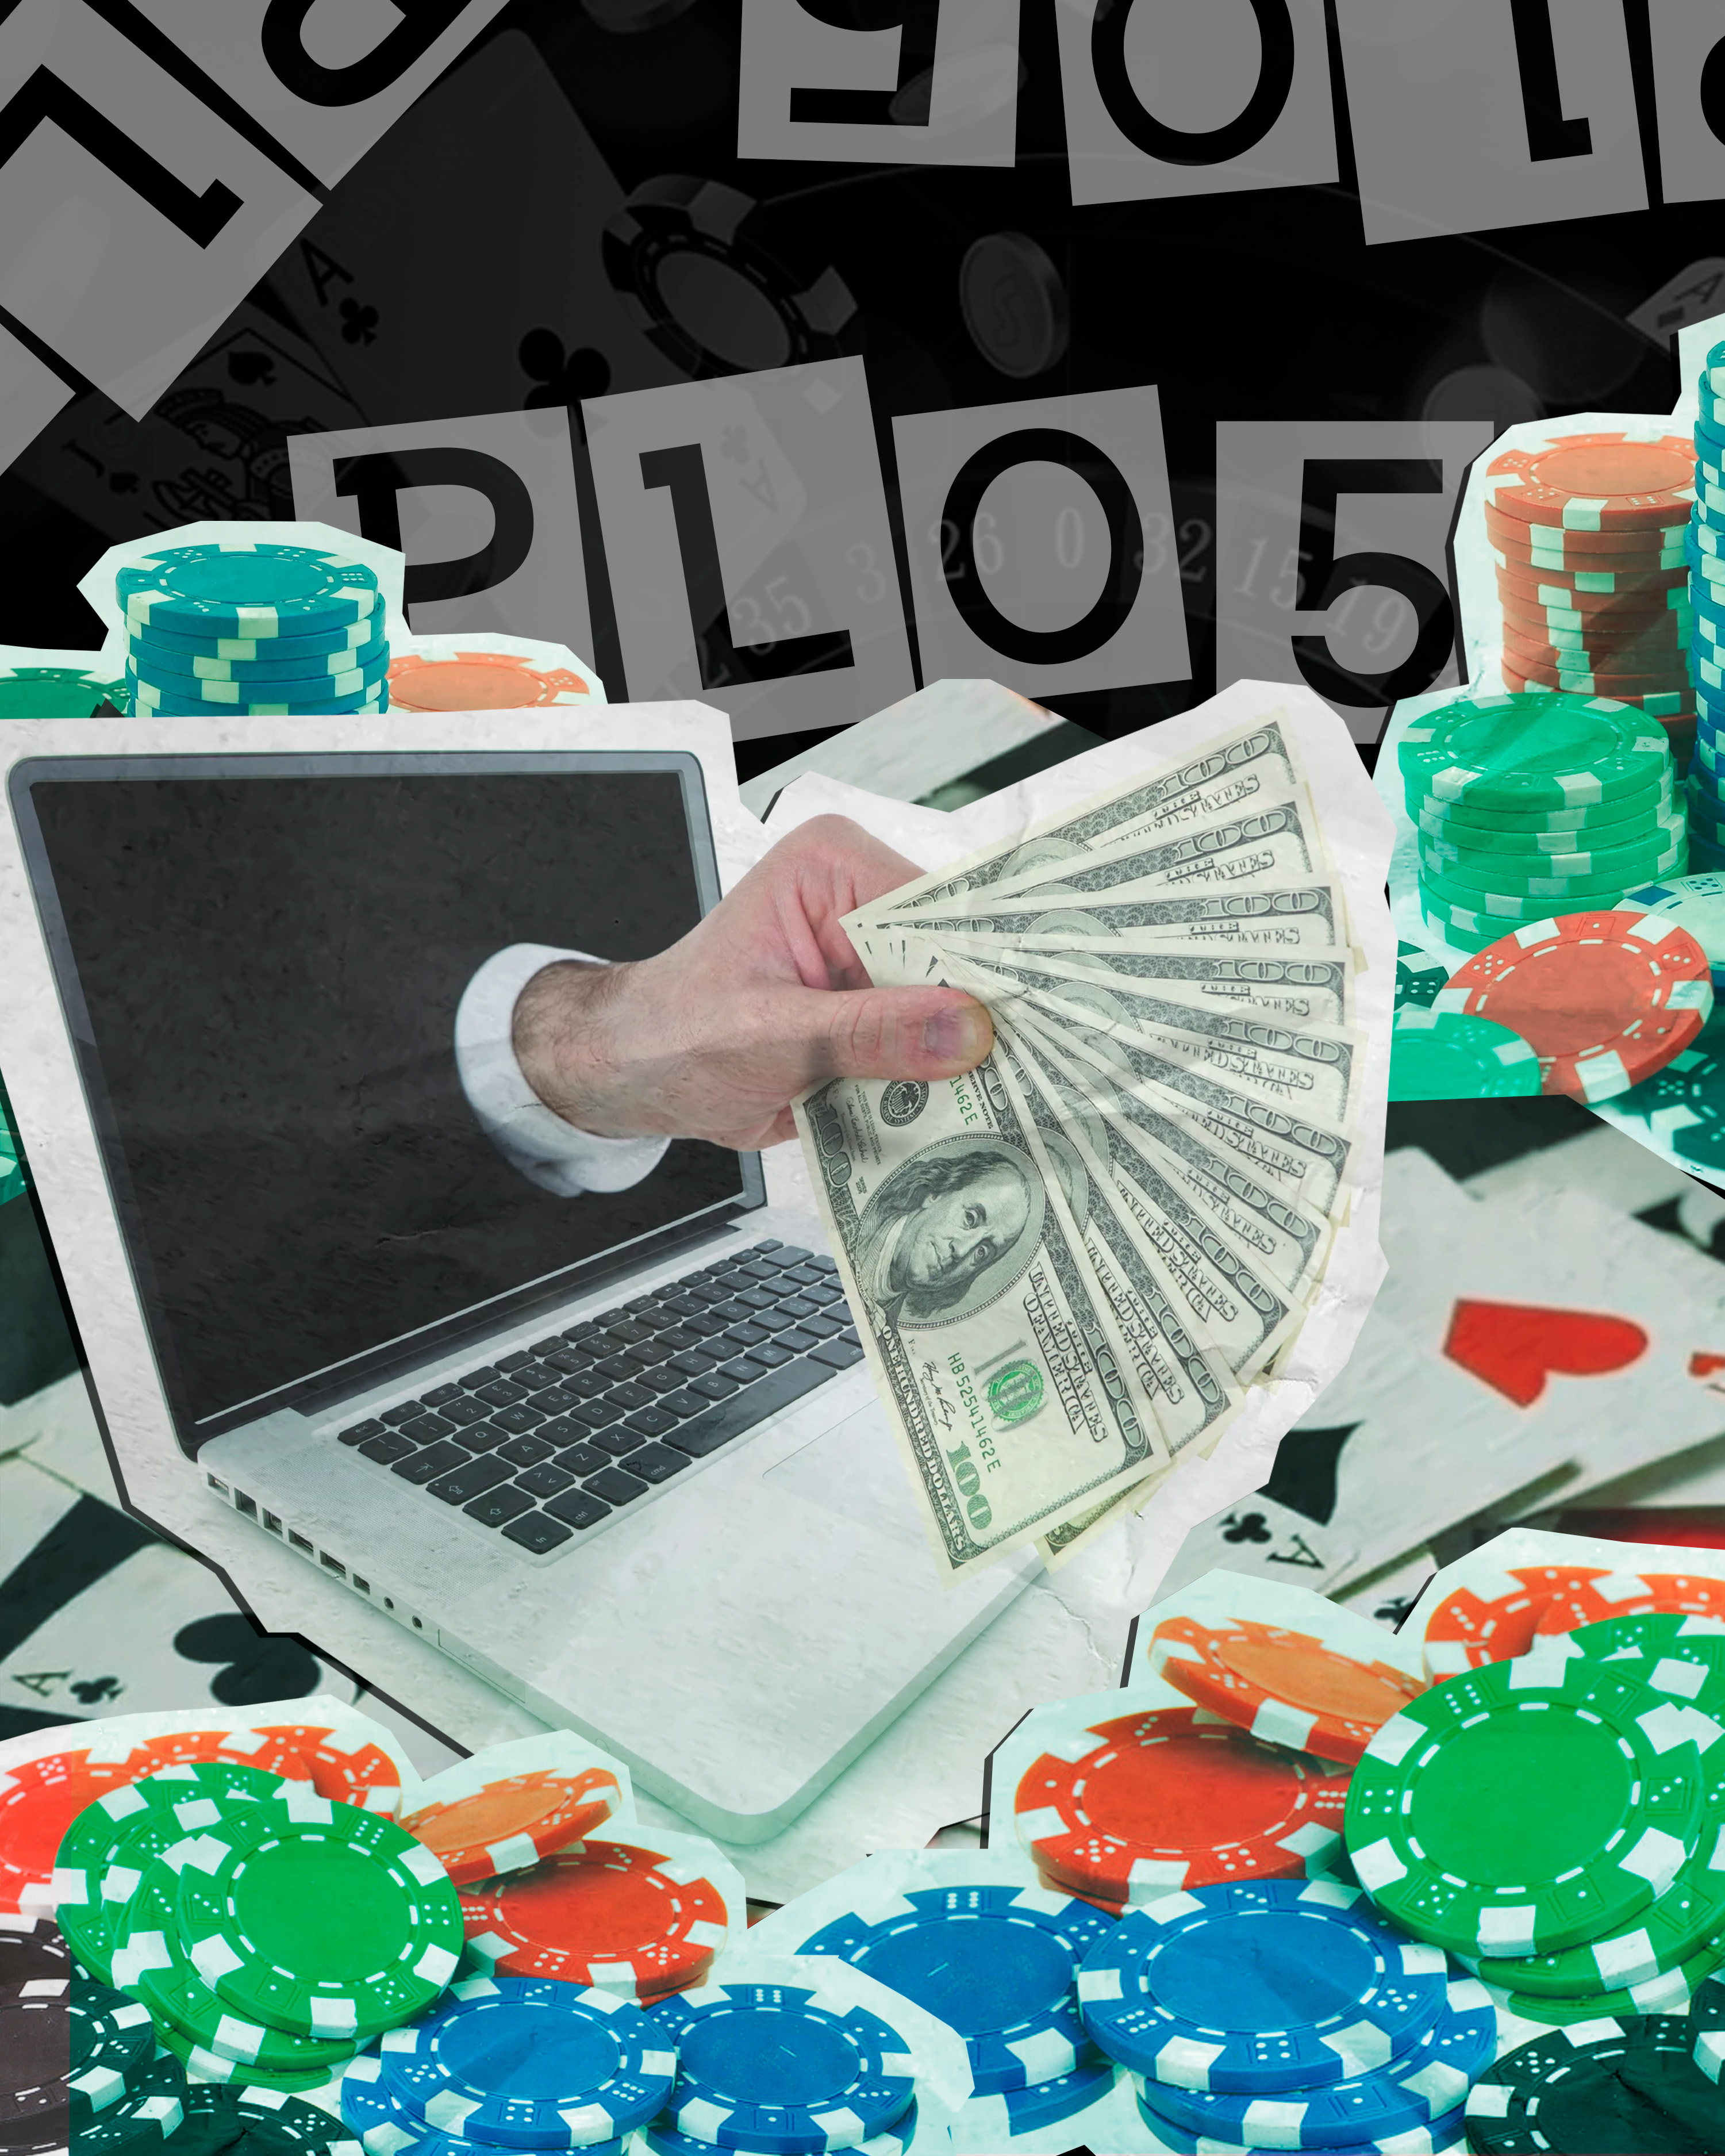 4 easy tips how to make money in PLO5